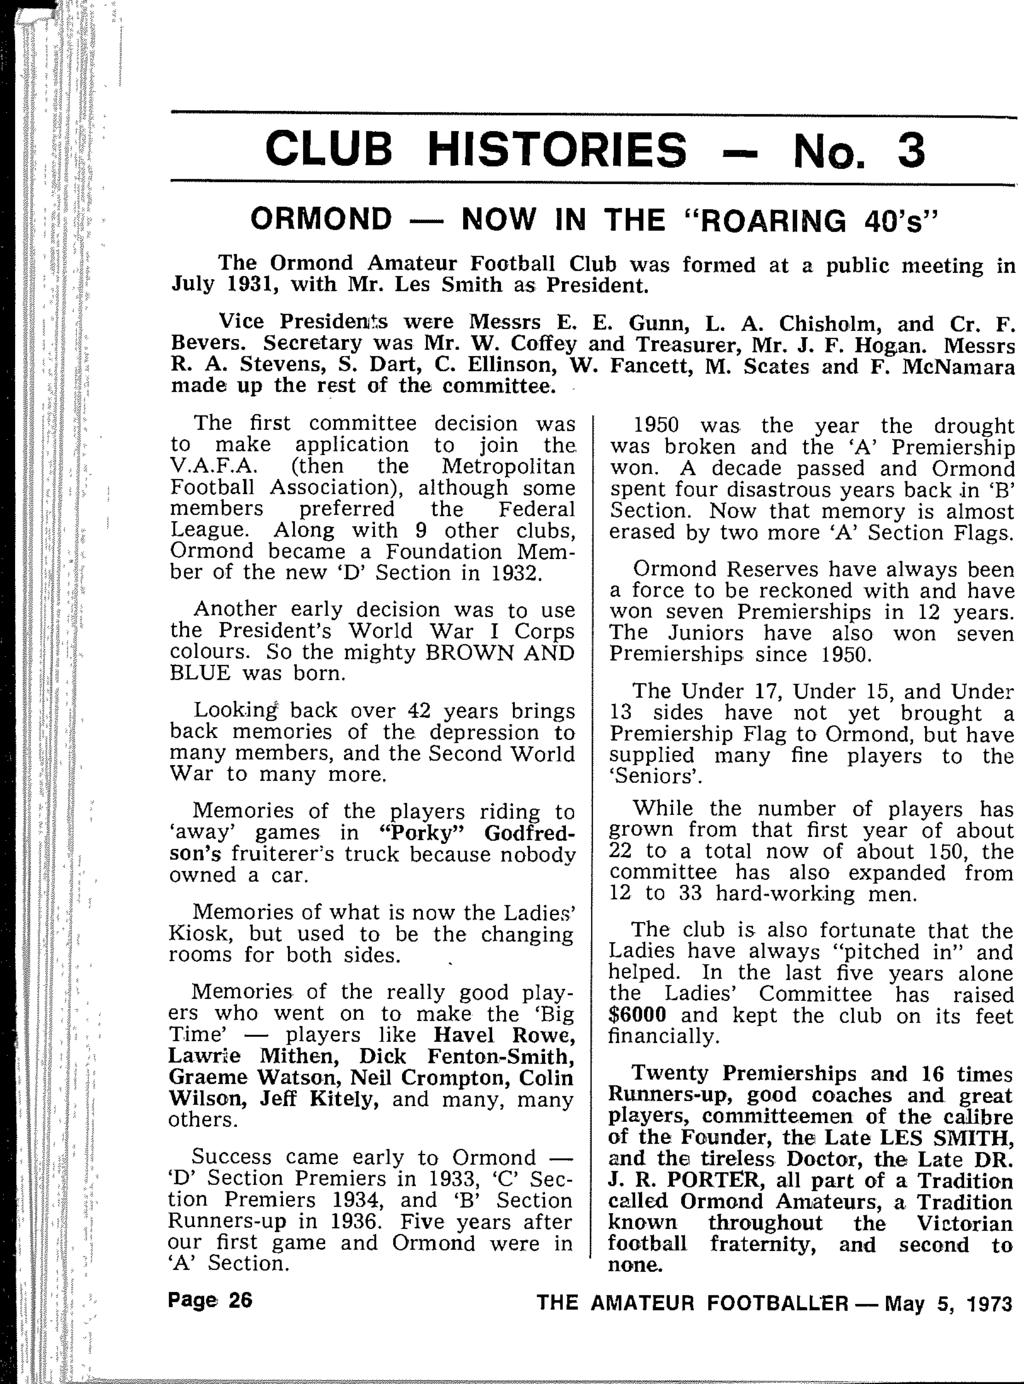 CLUB HISTORIES - No. 3 ORMOND - NOW IN THE "ROARING 40's" The Ormond Amateur Football Club was formed at a public meeting in July 1931, with Mr. Les Smith as President. Vice Presidents were Messrs E.